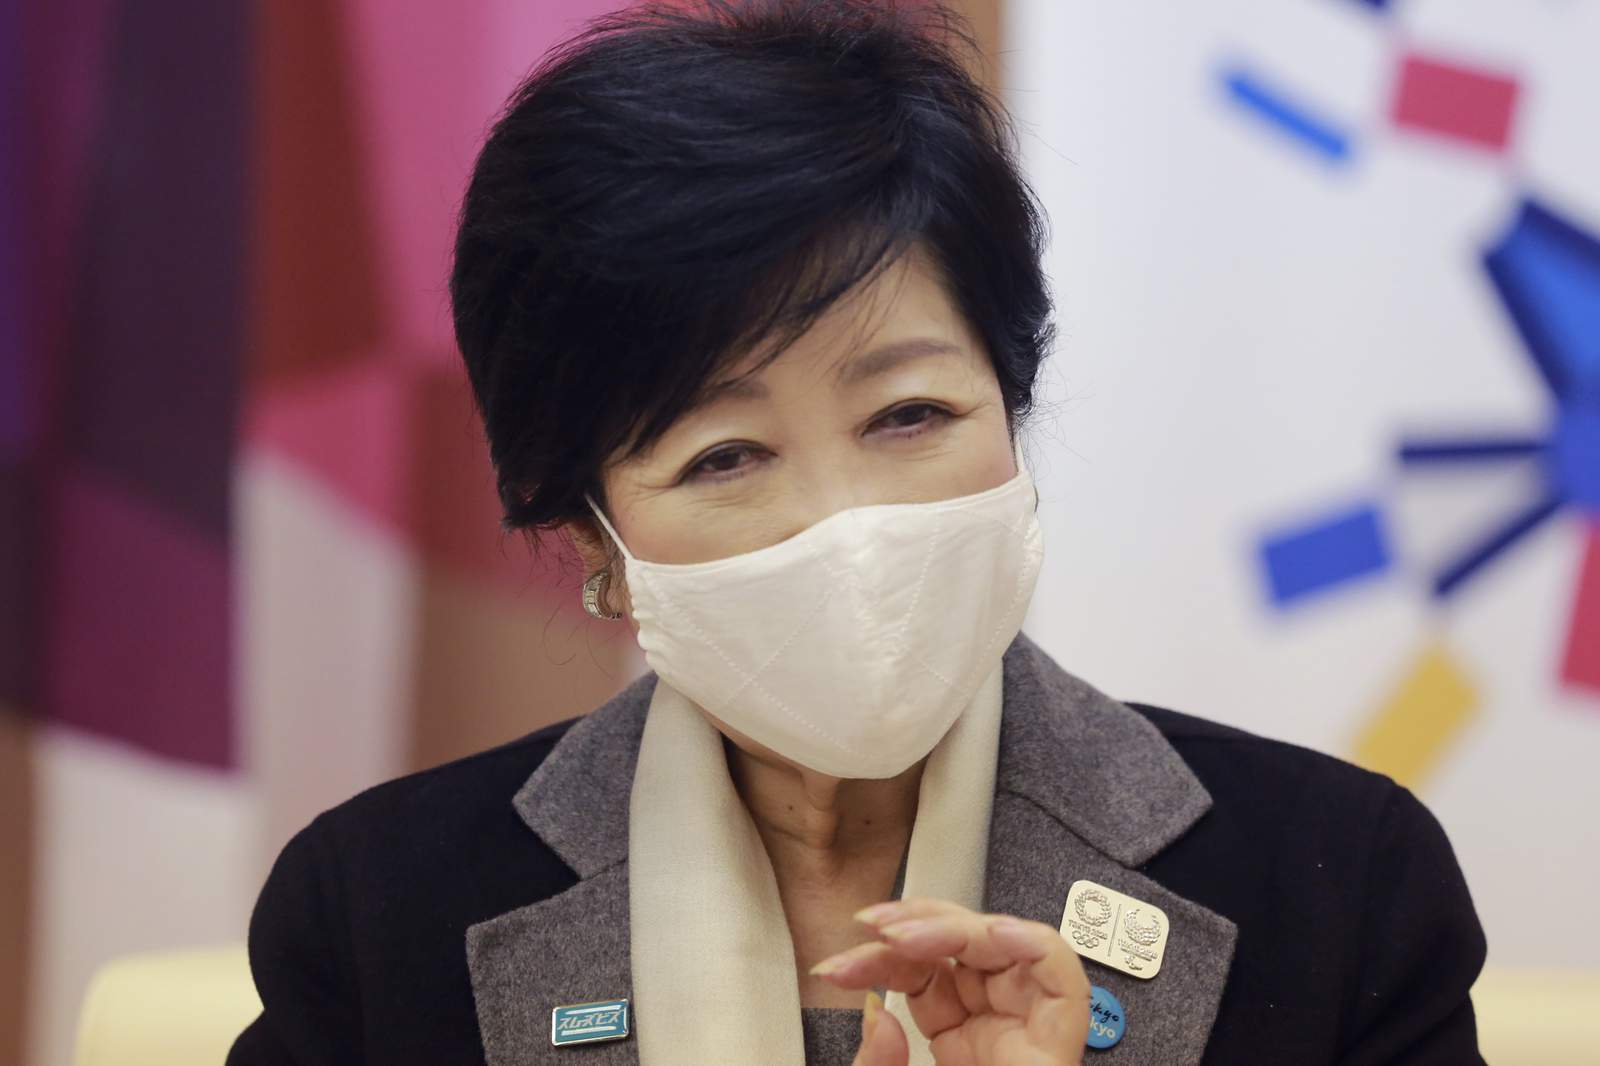 AP Interview: Tokyo leader: Vaccines give hope for Olympics